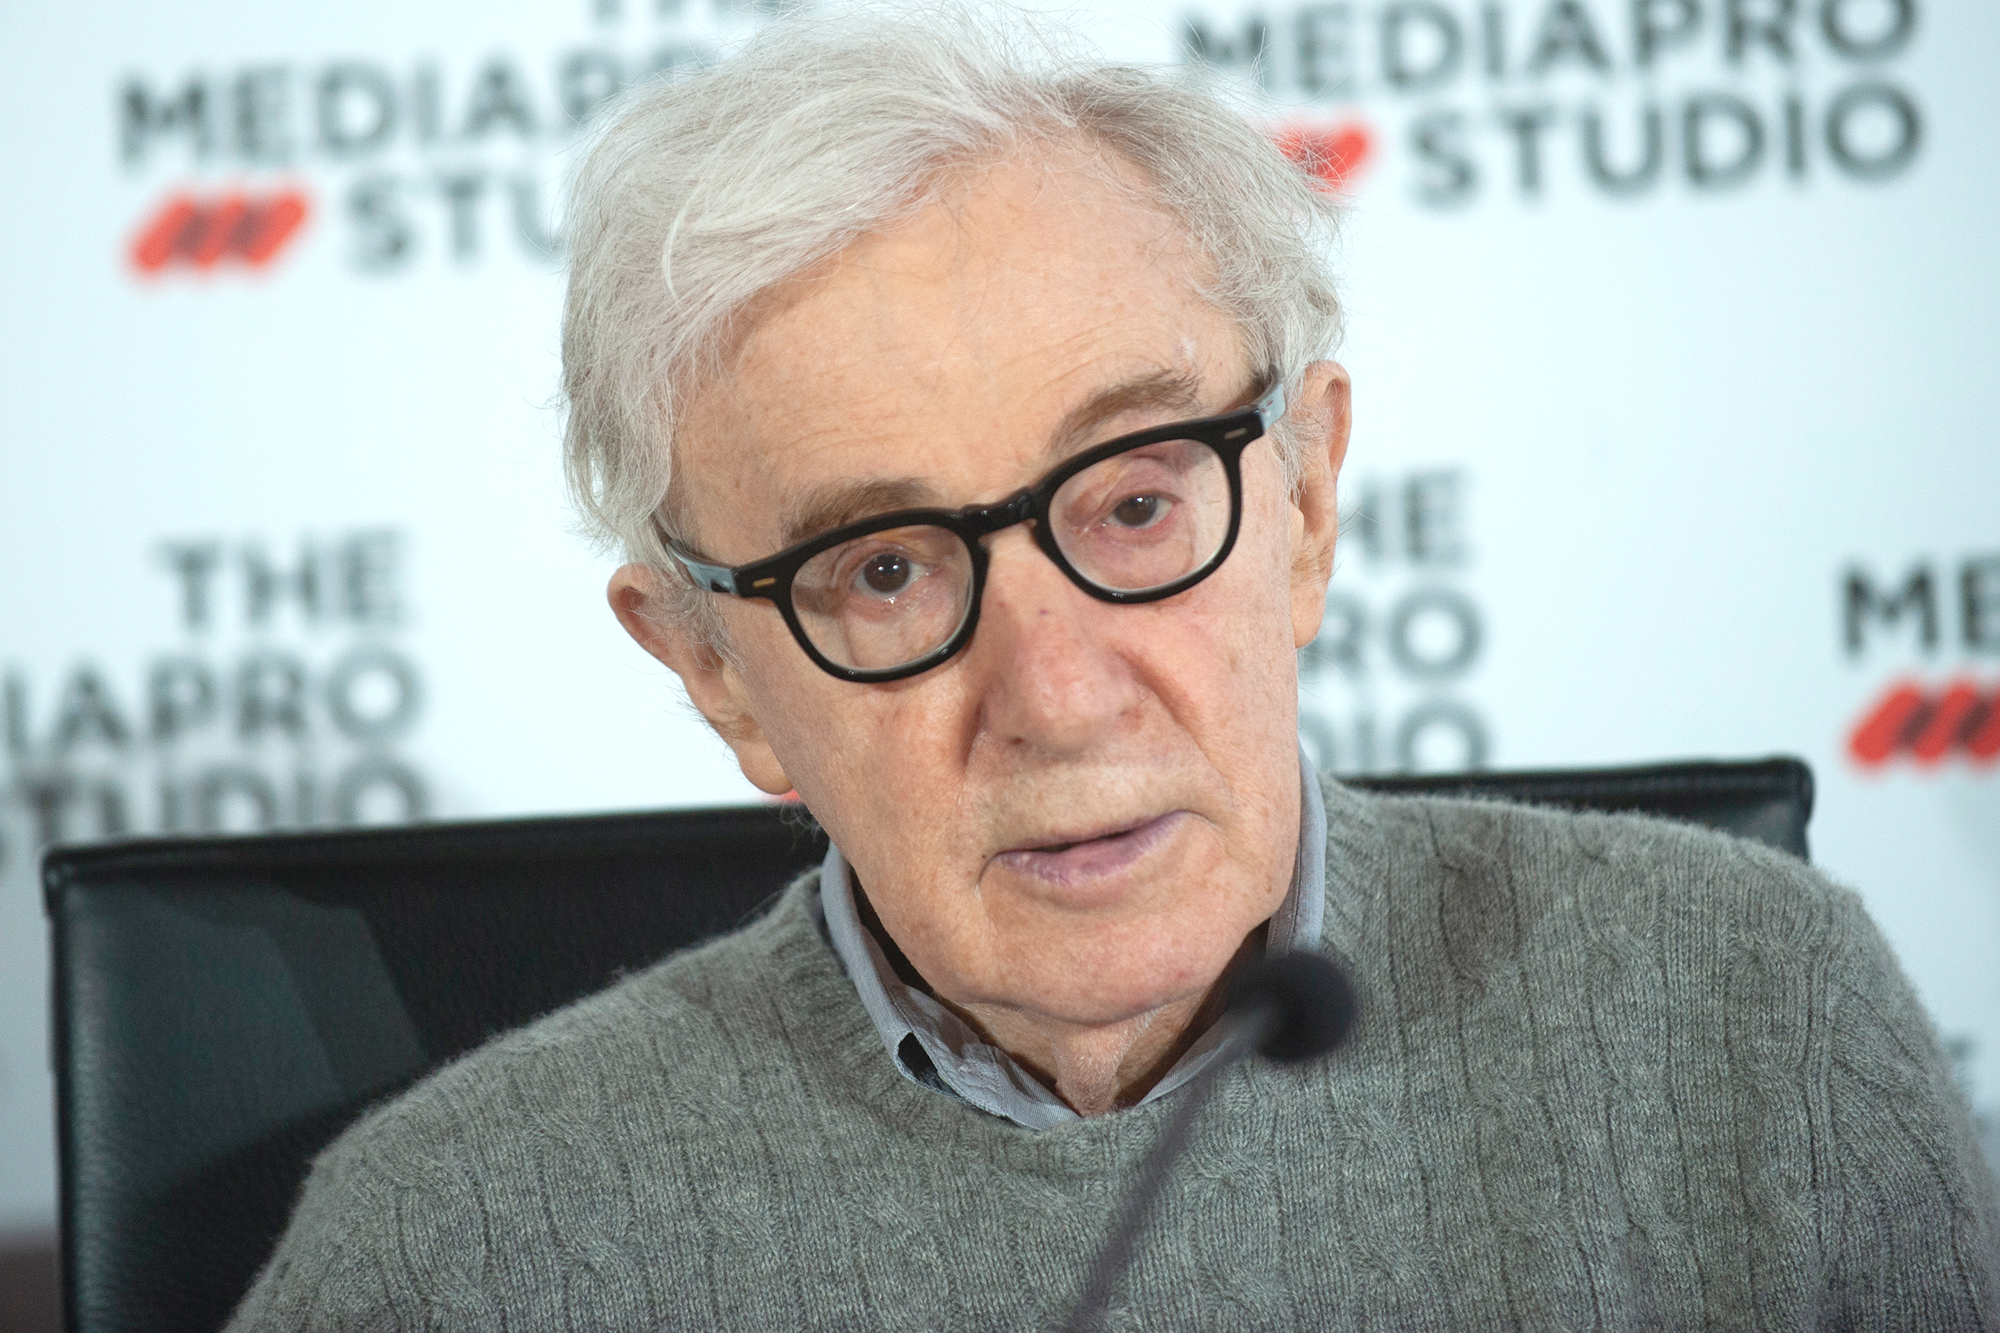 Woody Allen again denies sexual abuse allegations by Dylan Farrow in previously unaired interview